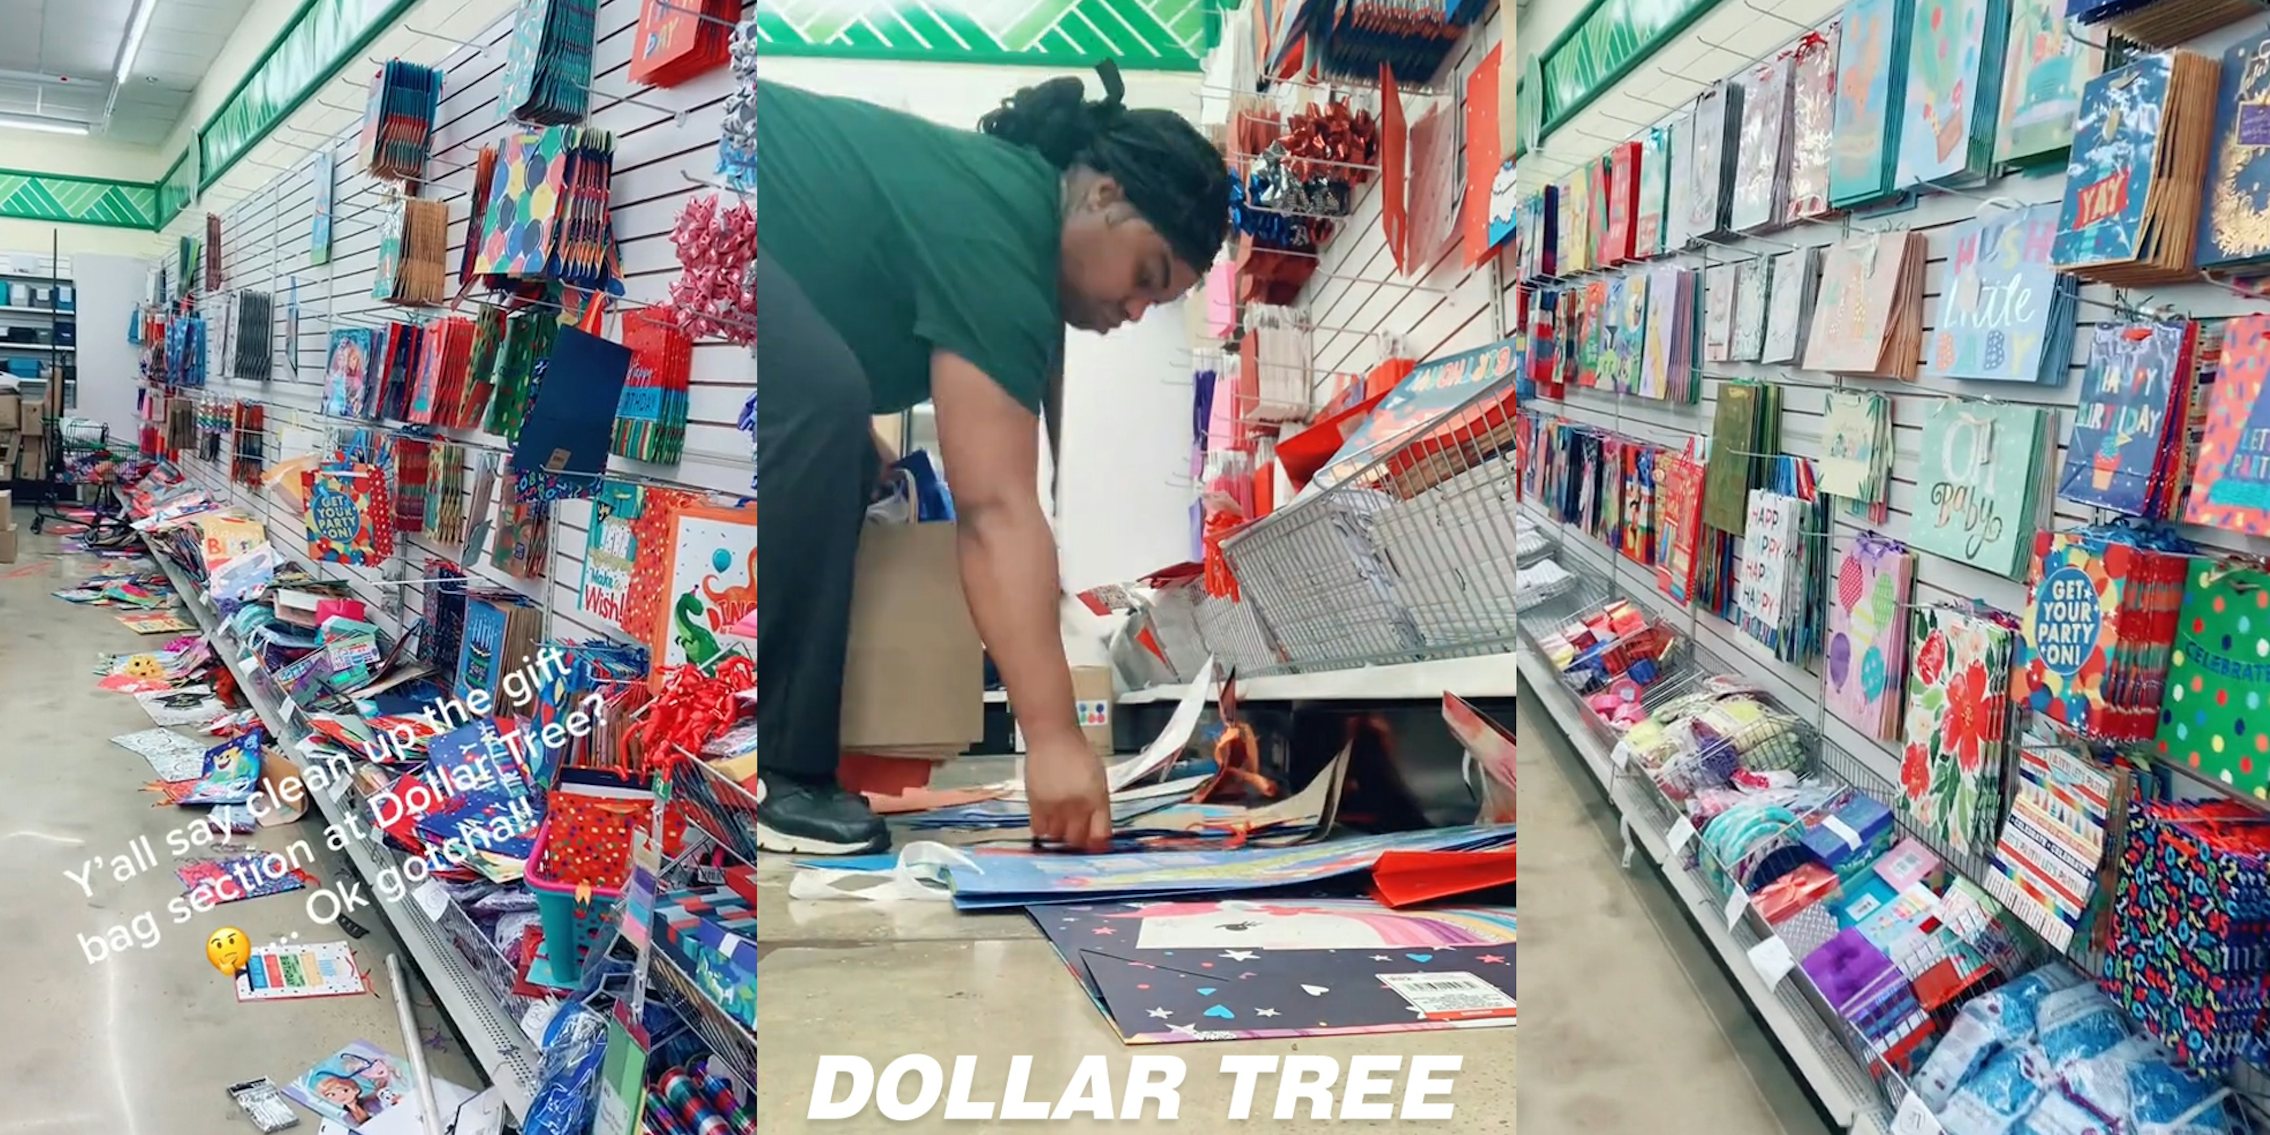 Dollar Tree gift bag section unorganized with caption 'Y'all say clean up the gift bag section at Dollar Tree? ...Ok gotcha!!' (l) Dollar Tree worker organizing bags with Dollar Tree logo at bottom (c) Dollar Tree gift ag area clean (r)